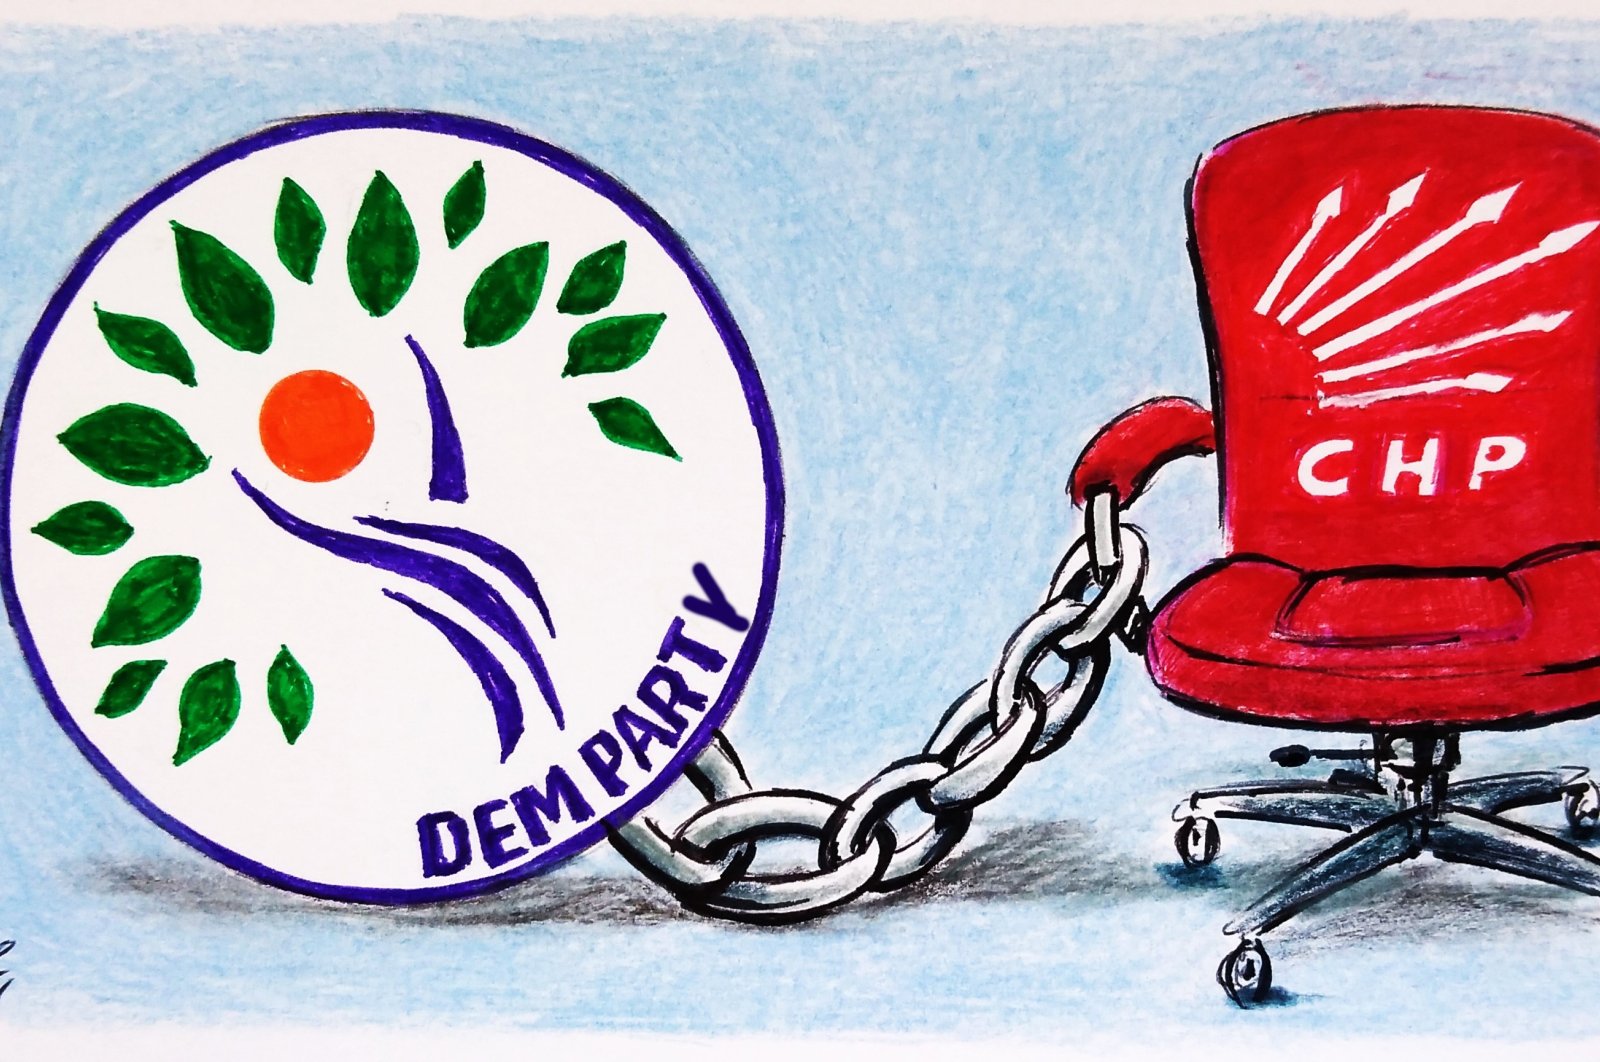 "There is no reason to think that some kind of "transparent" partnership between the CHP and YSP won’t fuel a debate on ideology and identity on the campaign trail." (Illustration by Erhan Yalvaç)